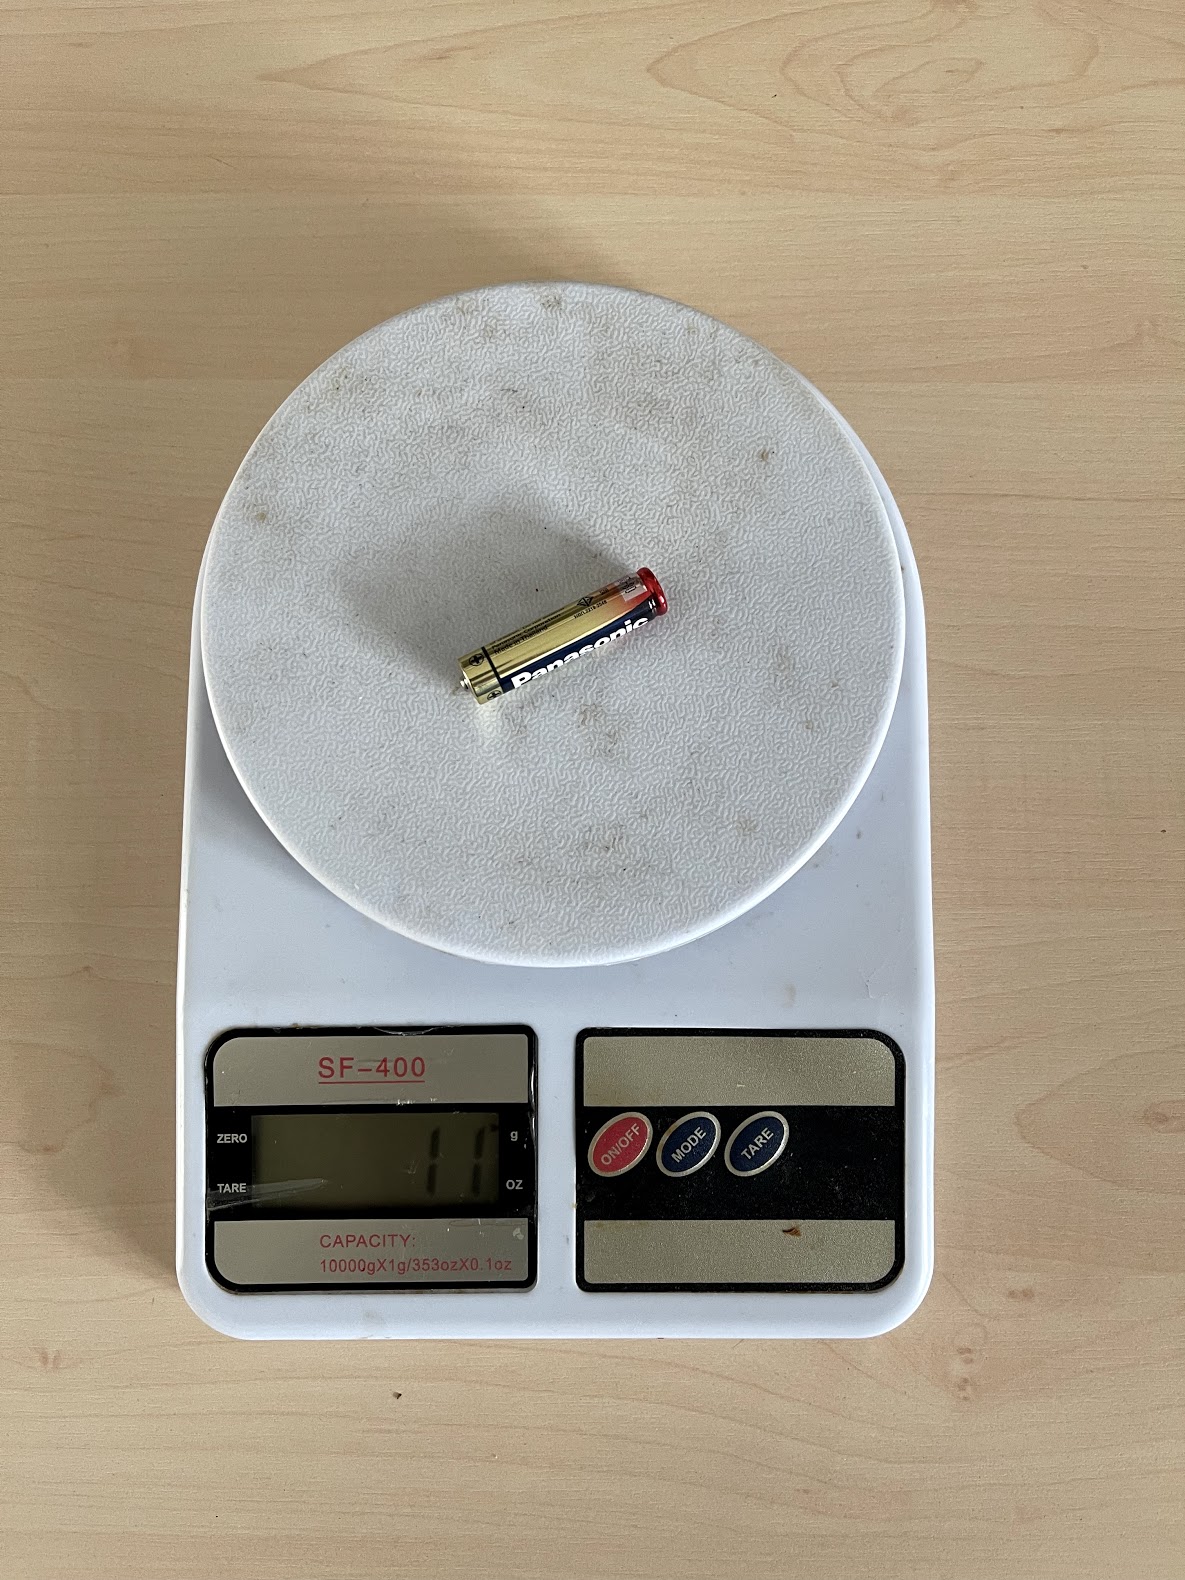 How much does an AAA battery weigh?